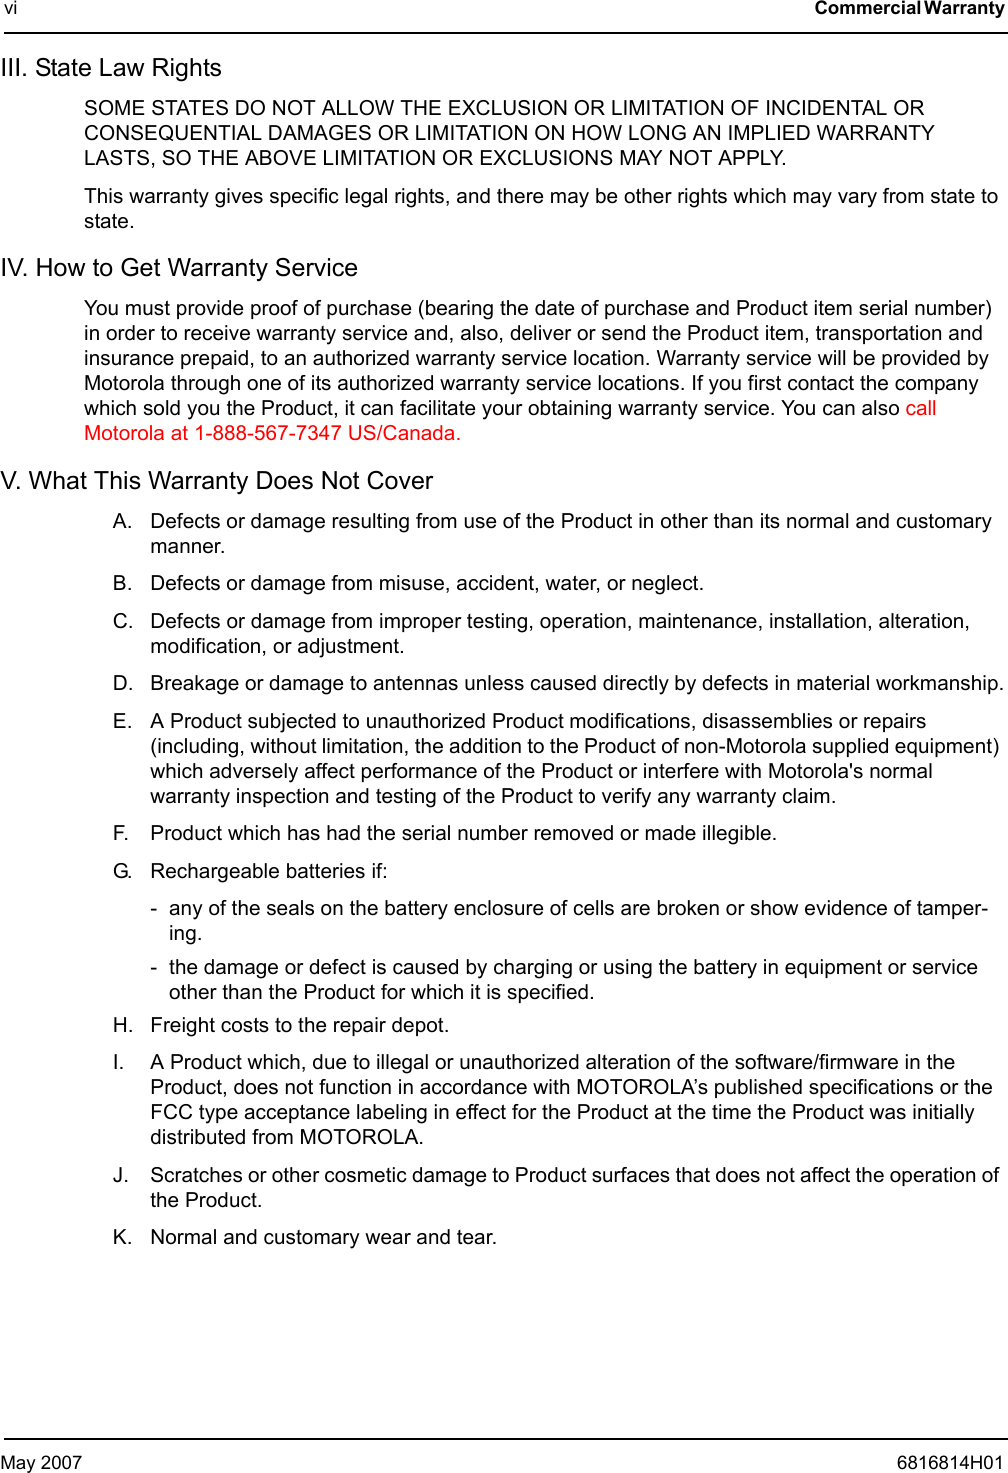 May 2007 6816814H01vi Commercial Warranty III. State Law Rights SOME STATES DO NOT ALLOW THE EXCLUSION OR LIMITATION OF INCIDENTAL OR CONSEQUENTIAL DAMAGES OR LIMITATION ON HOW LONG AN IMPLIED WARRANTY LASTS, SO THE ABOVE LIMITATION OR EXCLUSIONS MAY NOT APPLY.This warranty gives specific legal rights, and there may be other rights which may vary from state to state.IV. How to Get Warranty ServiceYou must provide proof of purchase (bearing the date of purchase and Product item serial number) in order to receive warranty service and, also, deliver or send the Product item, transportation and insurance prepaid, to an authorized warranty service location. Warranty service will be provided by Motorola through one of its authorized warranty service locations. If you first contact the company which sold you the Product, it can facilitate your obtaining warranty service. You can also call Motorola at 1-888-567-7347 US/Canada.V. What This Warranty Does Not CoverA. Defects or damage resulting from use of the Product in other than its normal and customary manner.B. Defects or damage from misuse, accident, water, or neglect.C. Defects or damage from improper testing, operation, maintenance, installation, alteration, modification, or adjustment.D. Breakage or damage to antennas unless caused directly by defects in material workmanship.E. A Product subjected to unauthorized Product modifications, disassemblies or repairs (including, without limitation, the addition to the Product of non-Motorola supplied equipment) which adversely affect performance of the Product or interfere with Motorola&apos;s normal warranty inspection and testing of the Product to verify any warranty claim.F. Product which has had the serial number removed or made illegible.G. Rechargeable batteries if:- any of the seals on the battery enclosure of cells are broken or show evidence of tamper-ing.- the damage or defect is caused by charging or using the battery in equipment or service other than the Product for which it is specified.H. Freight costs to the repair depot.I. A Product which, due to illegal or unauthorized alteration of the software/firmware in the Product, does not function in accordance with MOTOROLA’s published specifications or the FCC type acceptance labeling in effect for the Product at the time the Product was initially distributed from MOTOROLA.J. Scratches or other cosmetic damage to Product surfaces that does not affect the operation of the Product.K. Normal and customary wear and tear.